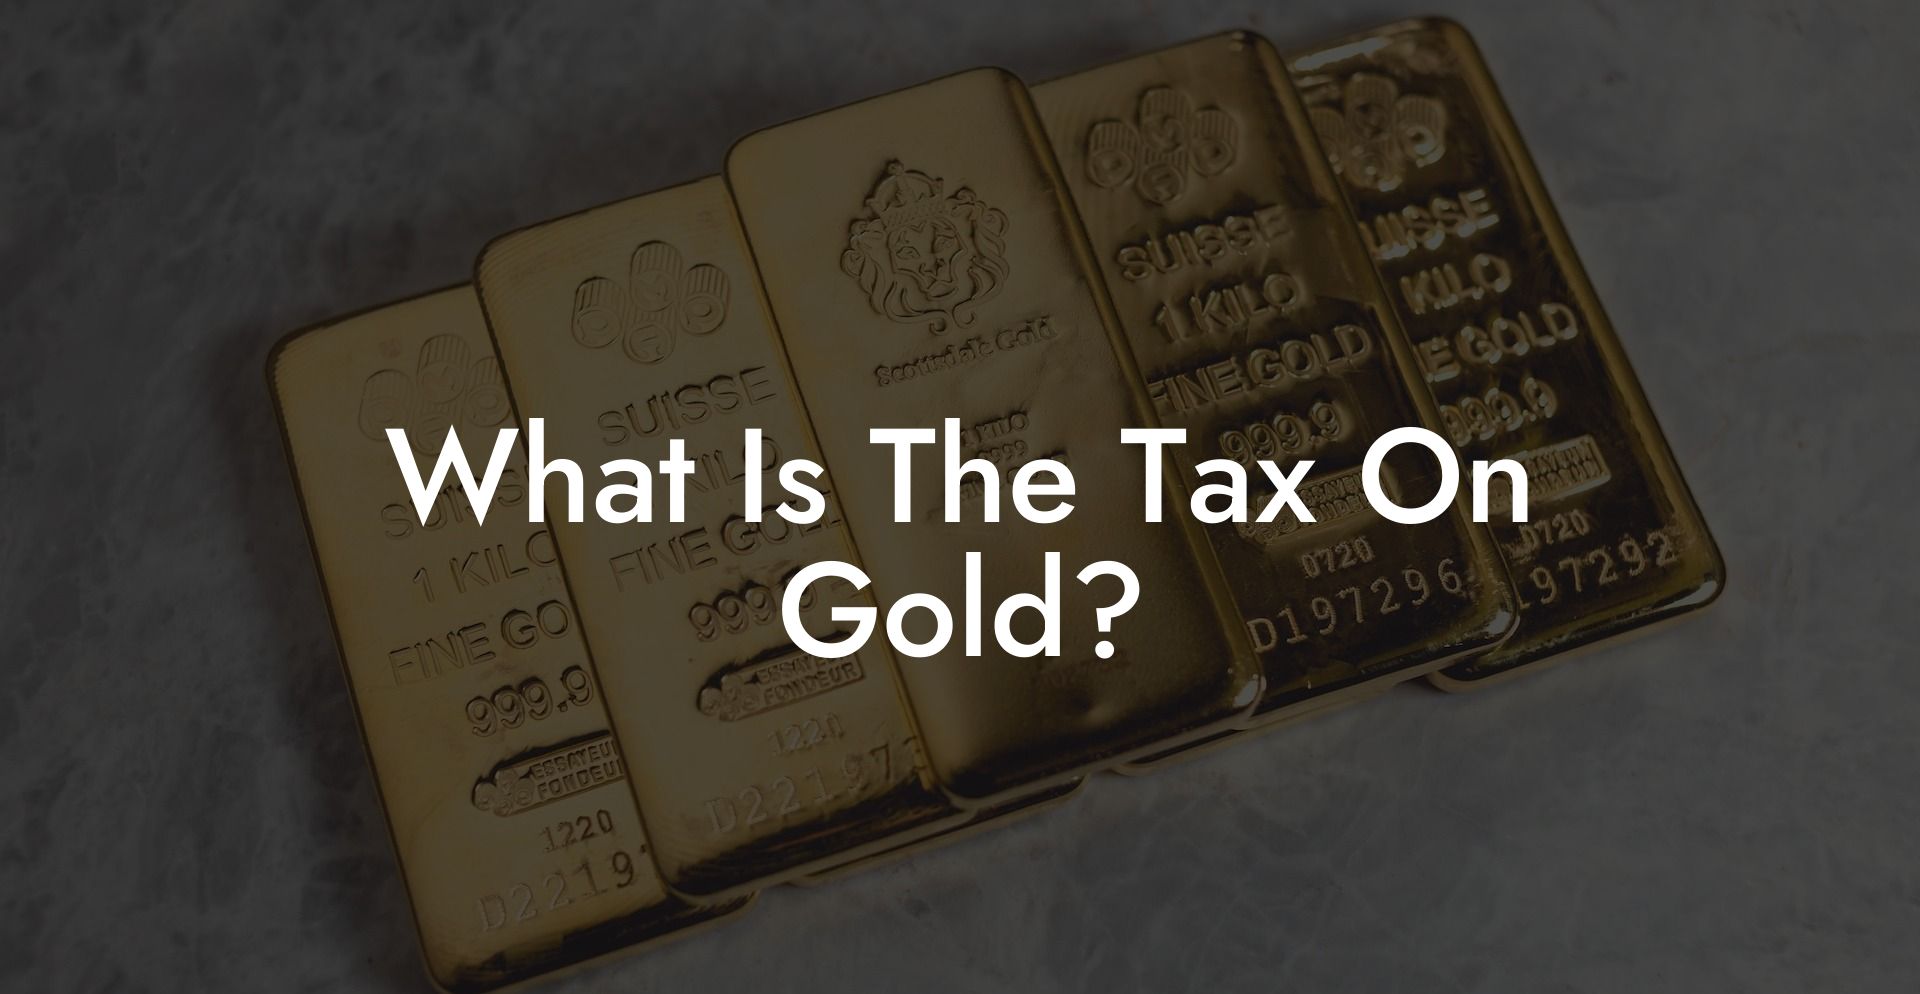 What Is The Tax On Gold?